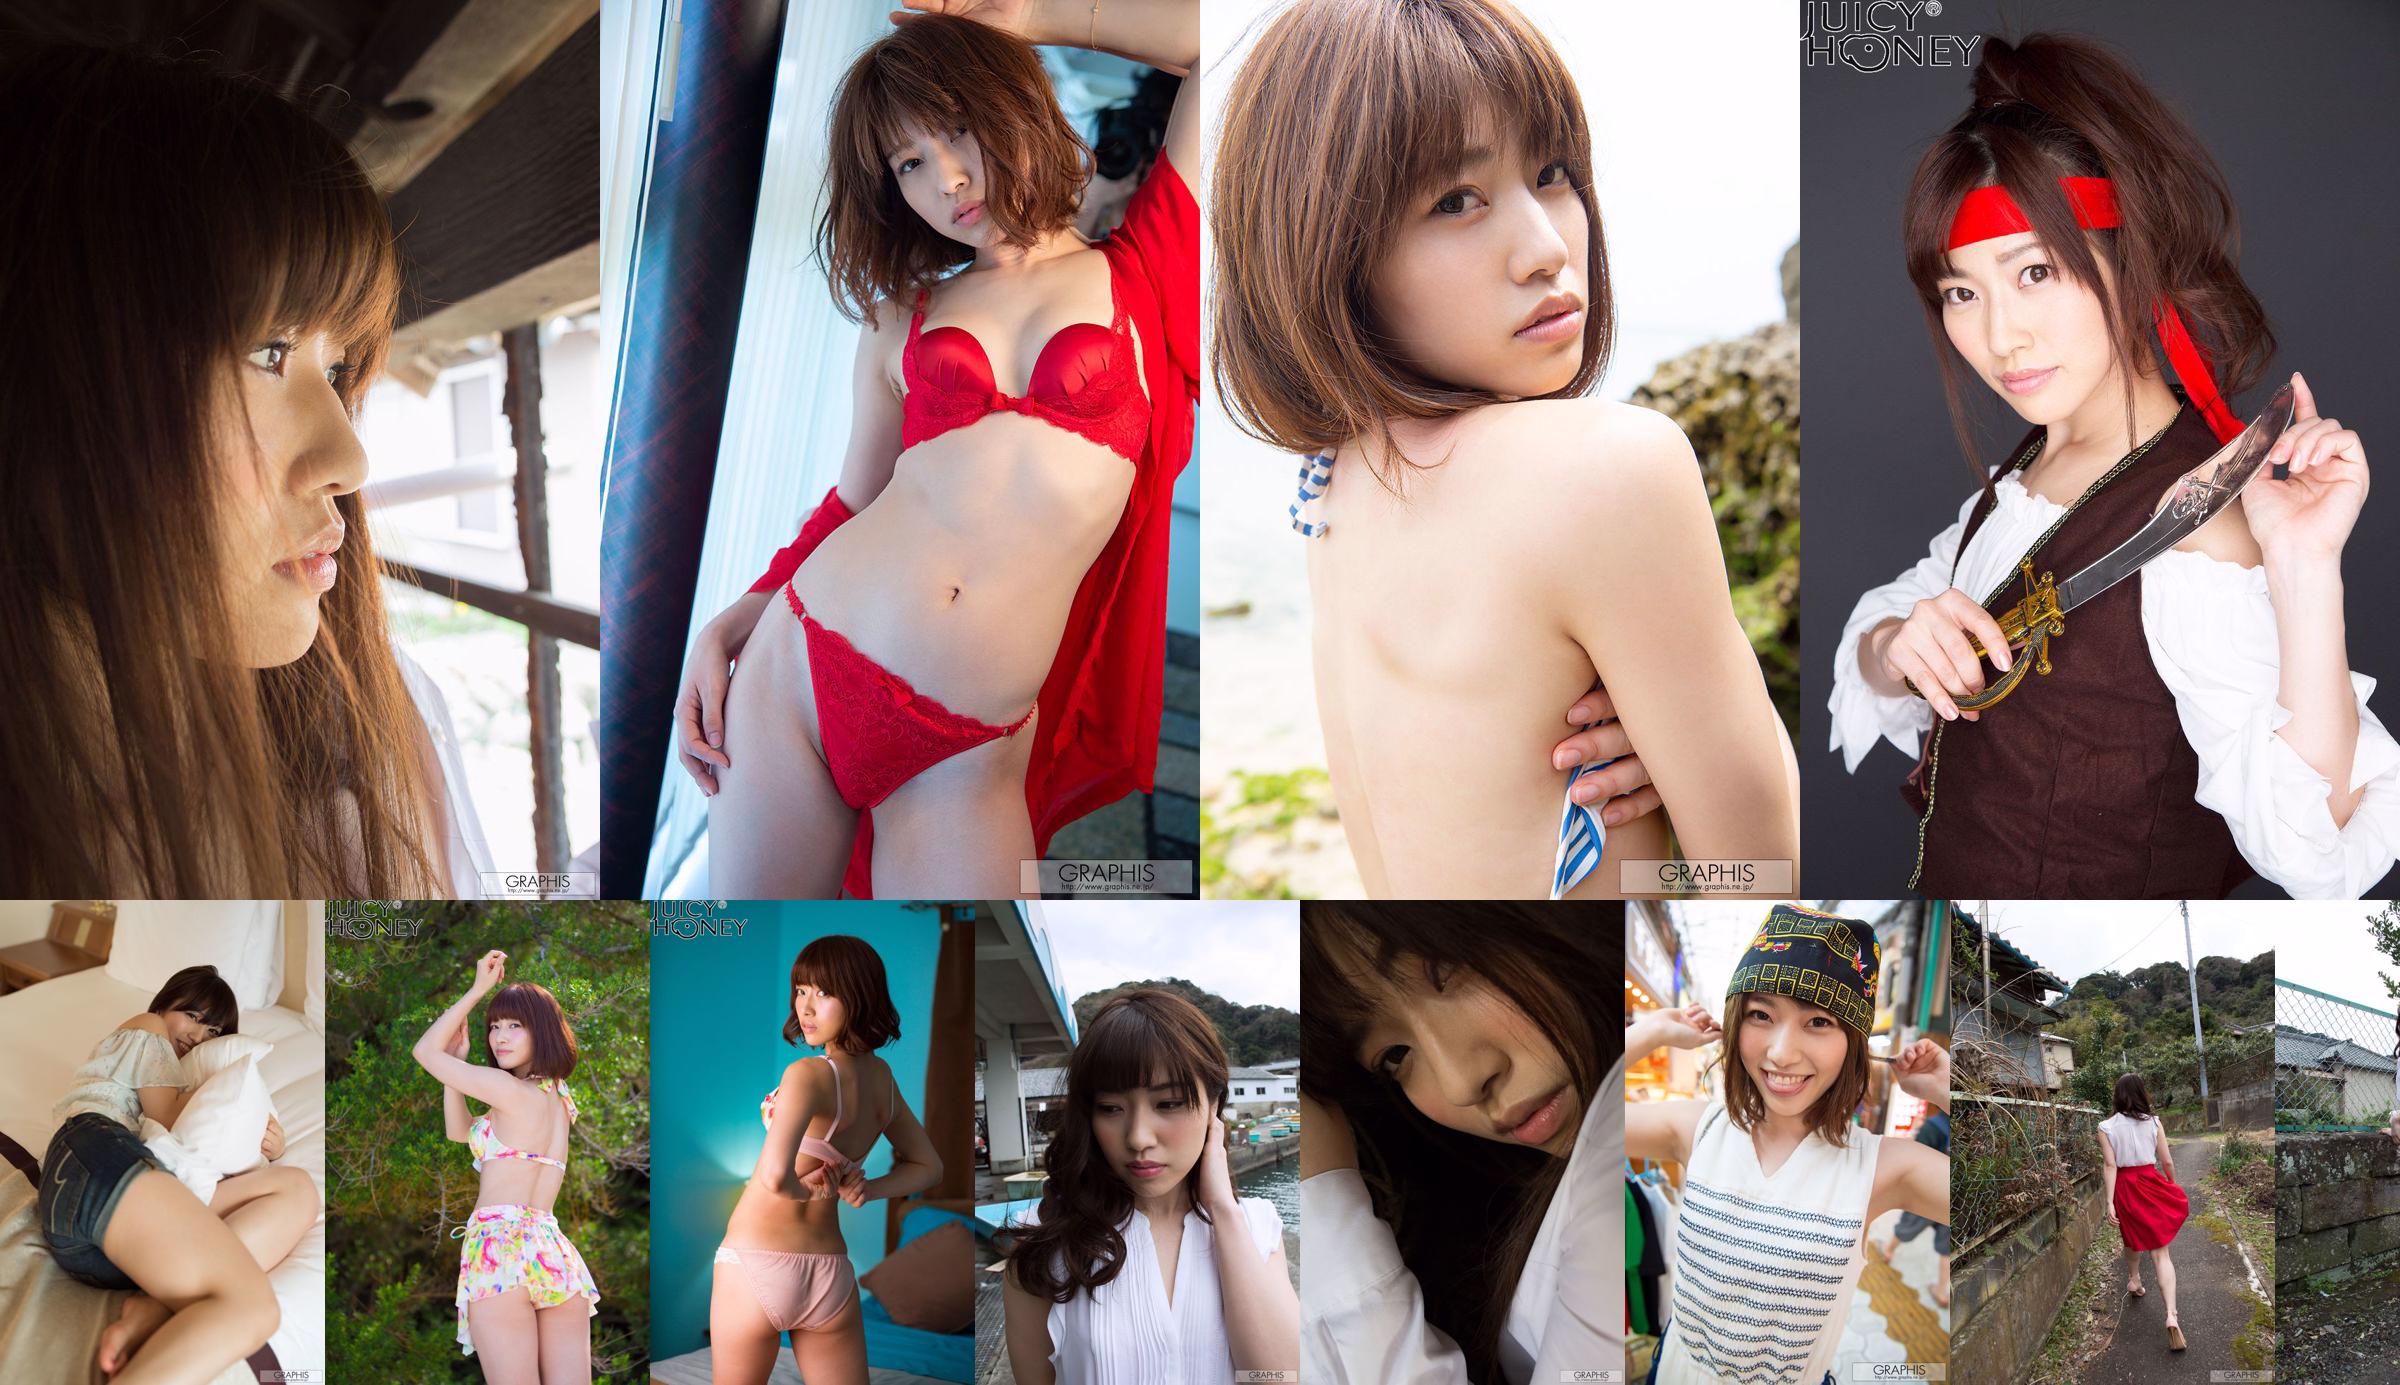 Ichikawa ま さ み "Majestic Beauty" [Graphis] Gals No.09eac1 Page 9